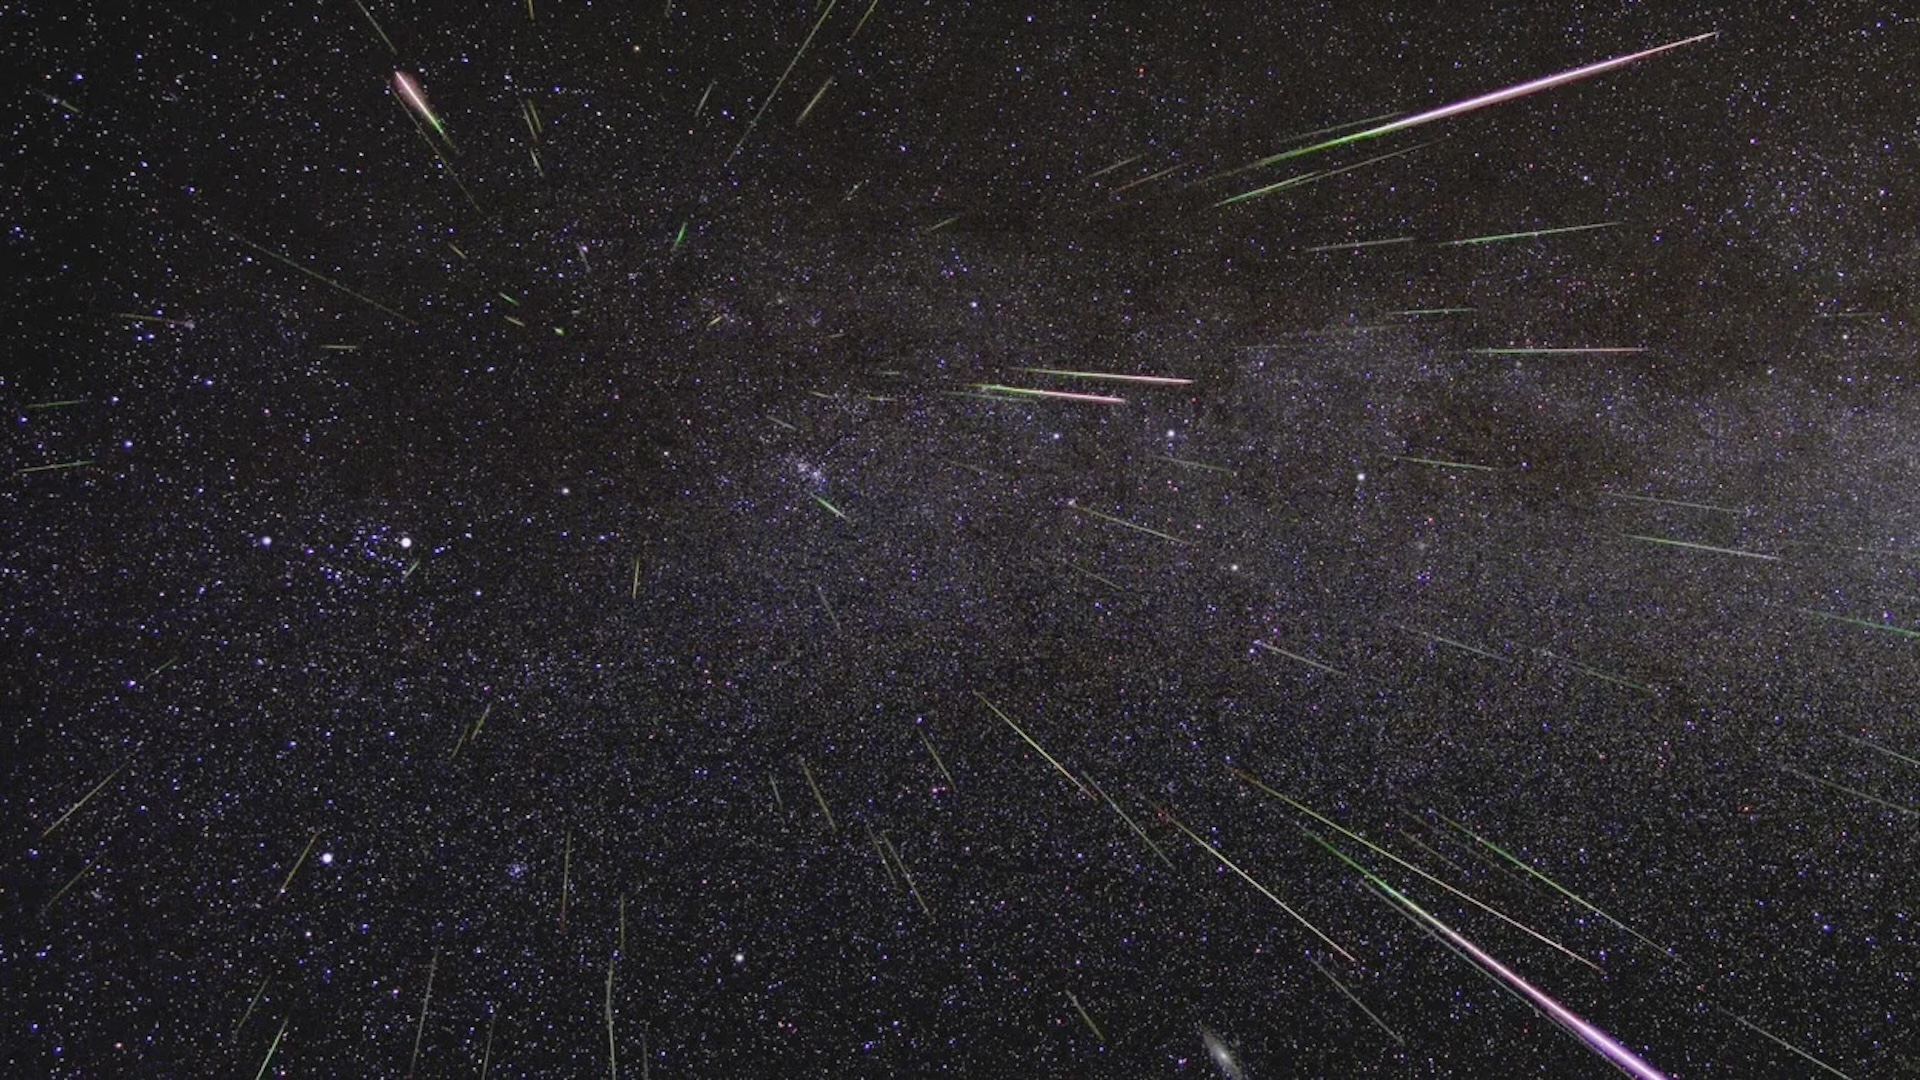  The Perseid meteor shower is about to peak. Here's when to see the most 'shooting stars'. 